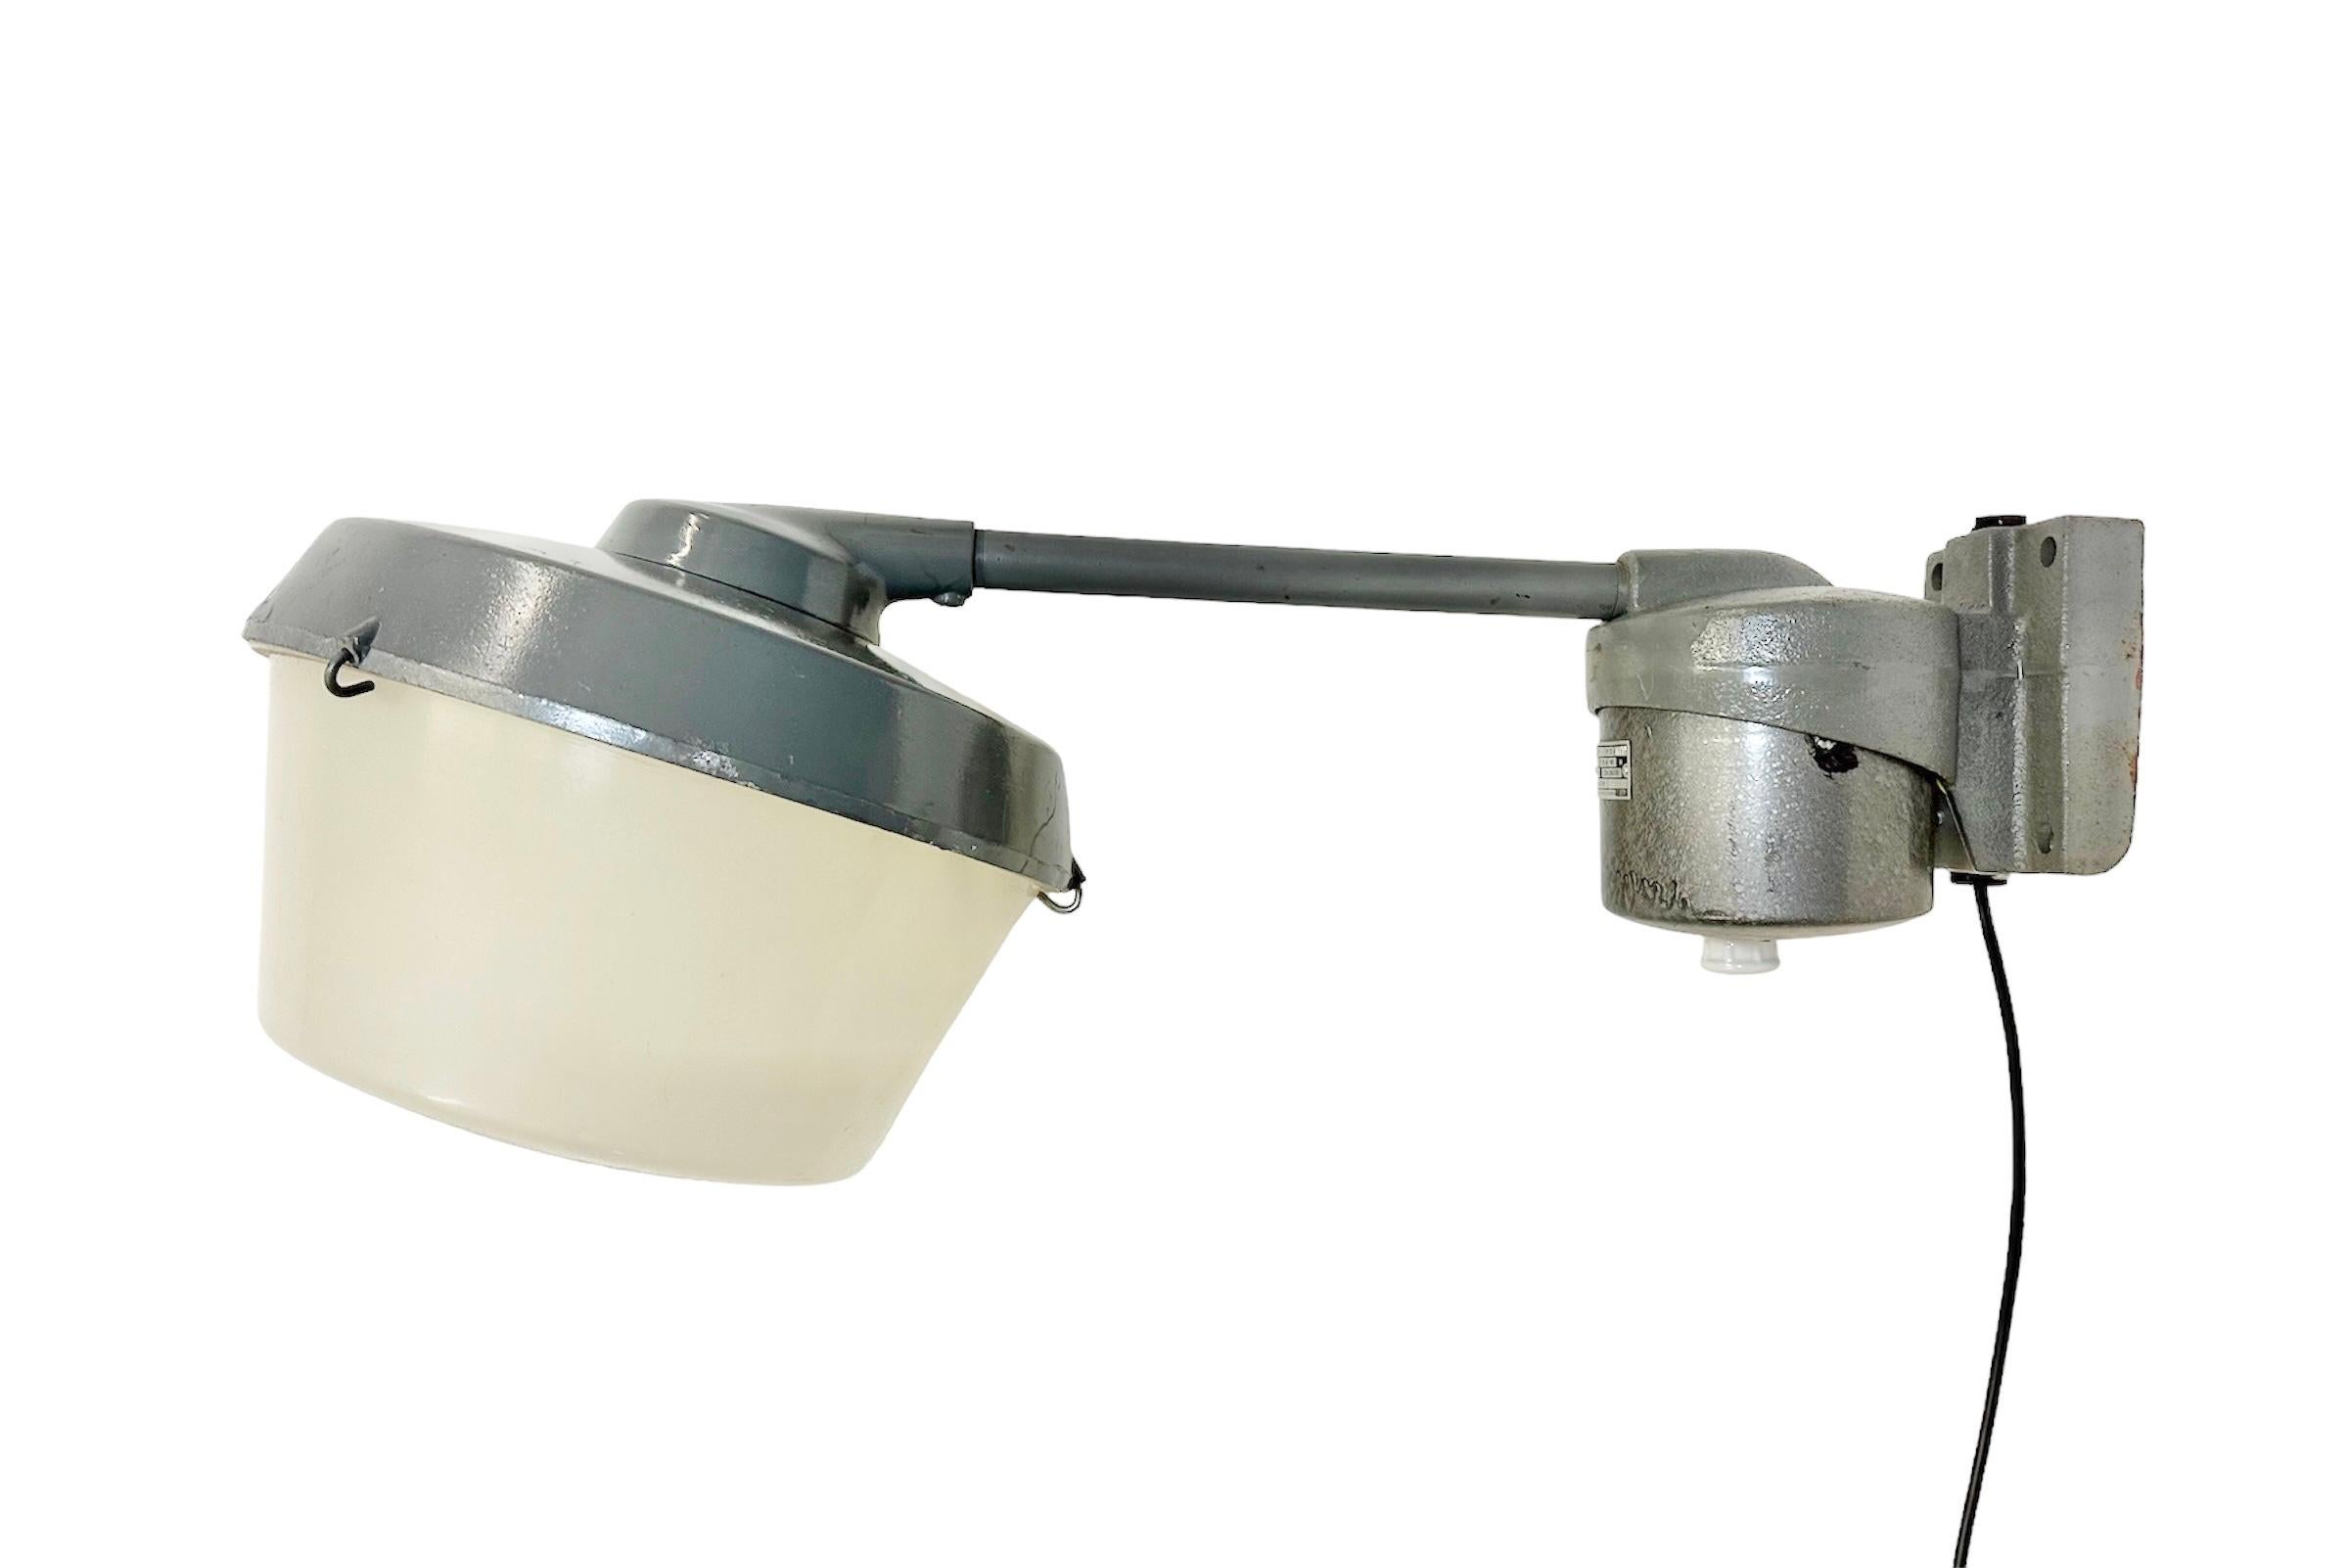 Industrial factory wall light made in former Czechoslovakia during the 1970s. It features a grey cast iron wall mounting and arm, a grey cast aluminium shade and a plastic milk glass cover.  The original socket requires standard E 27 / E 26 light